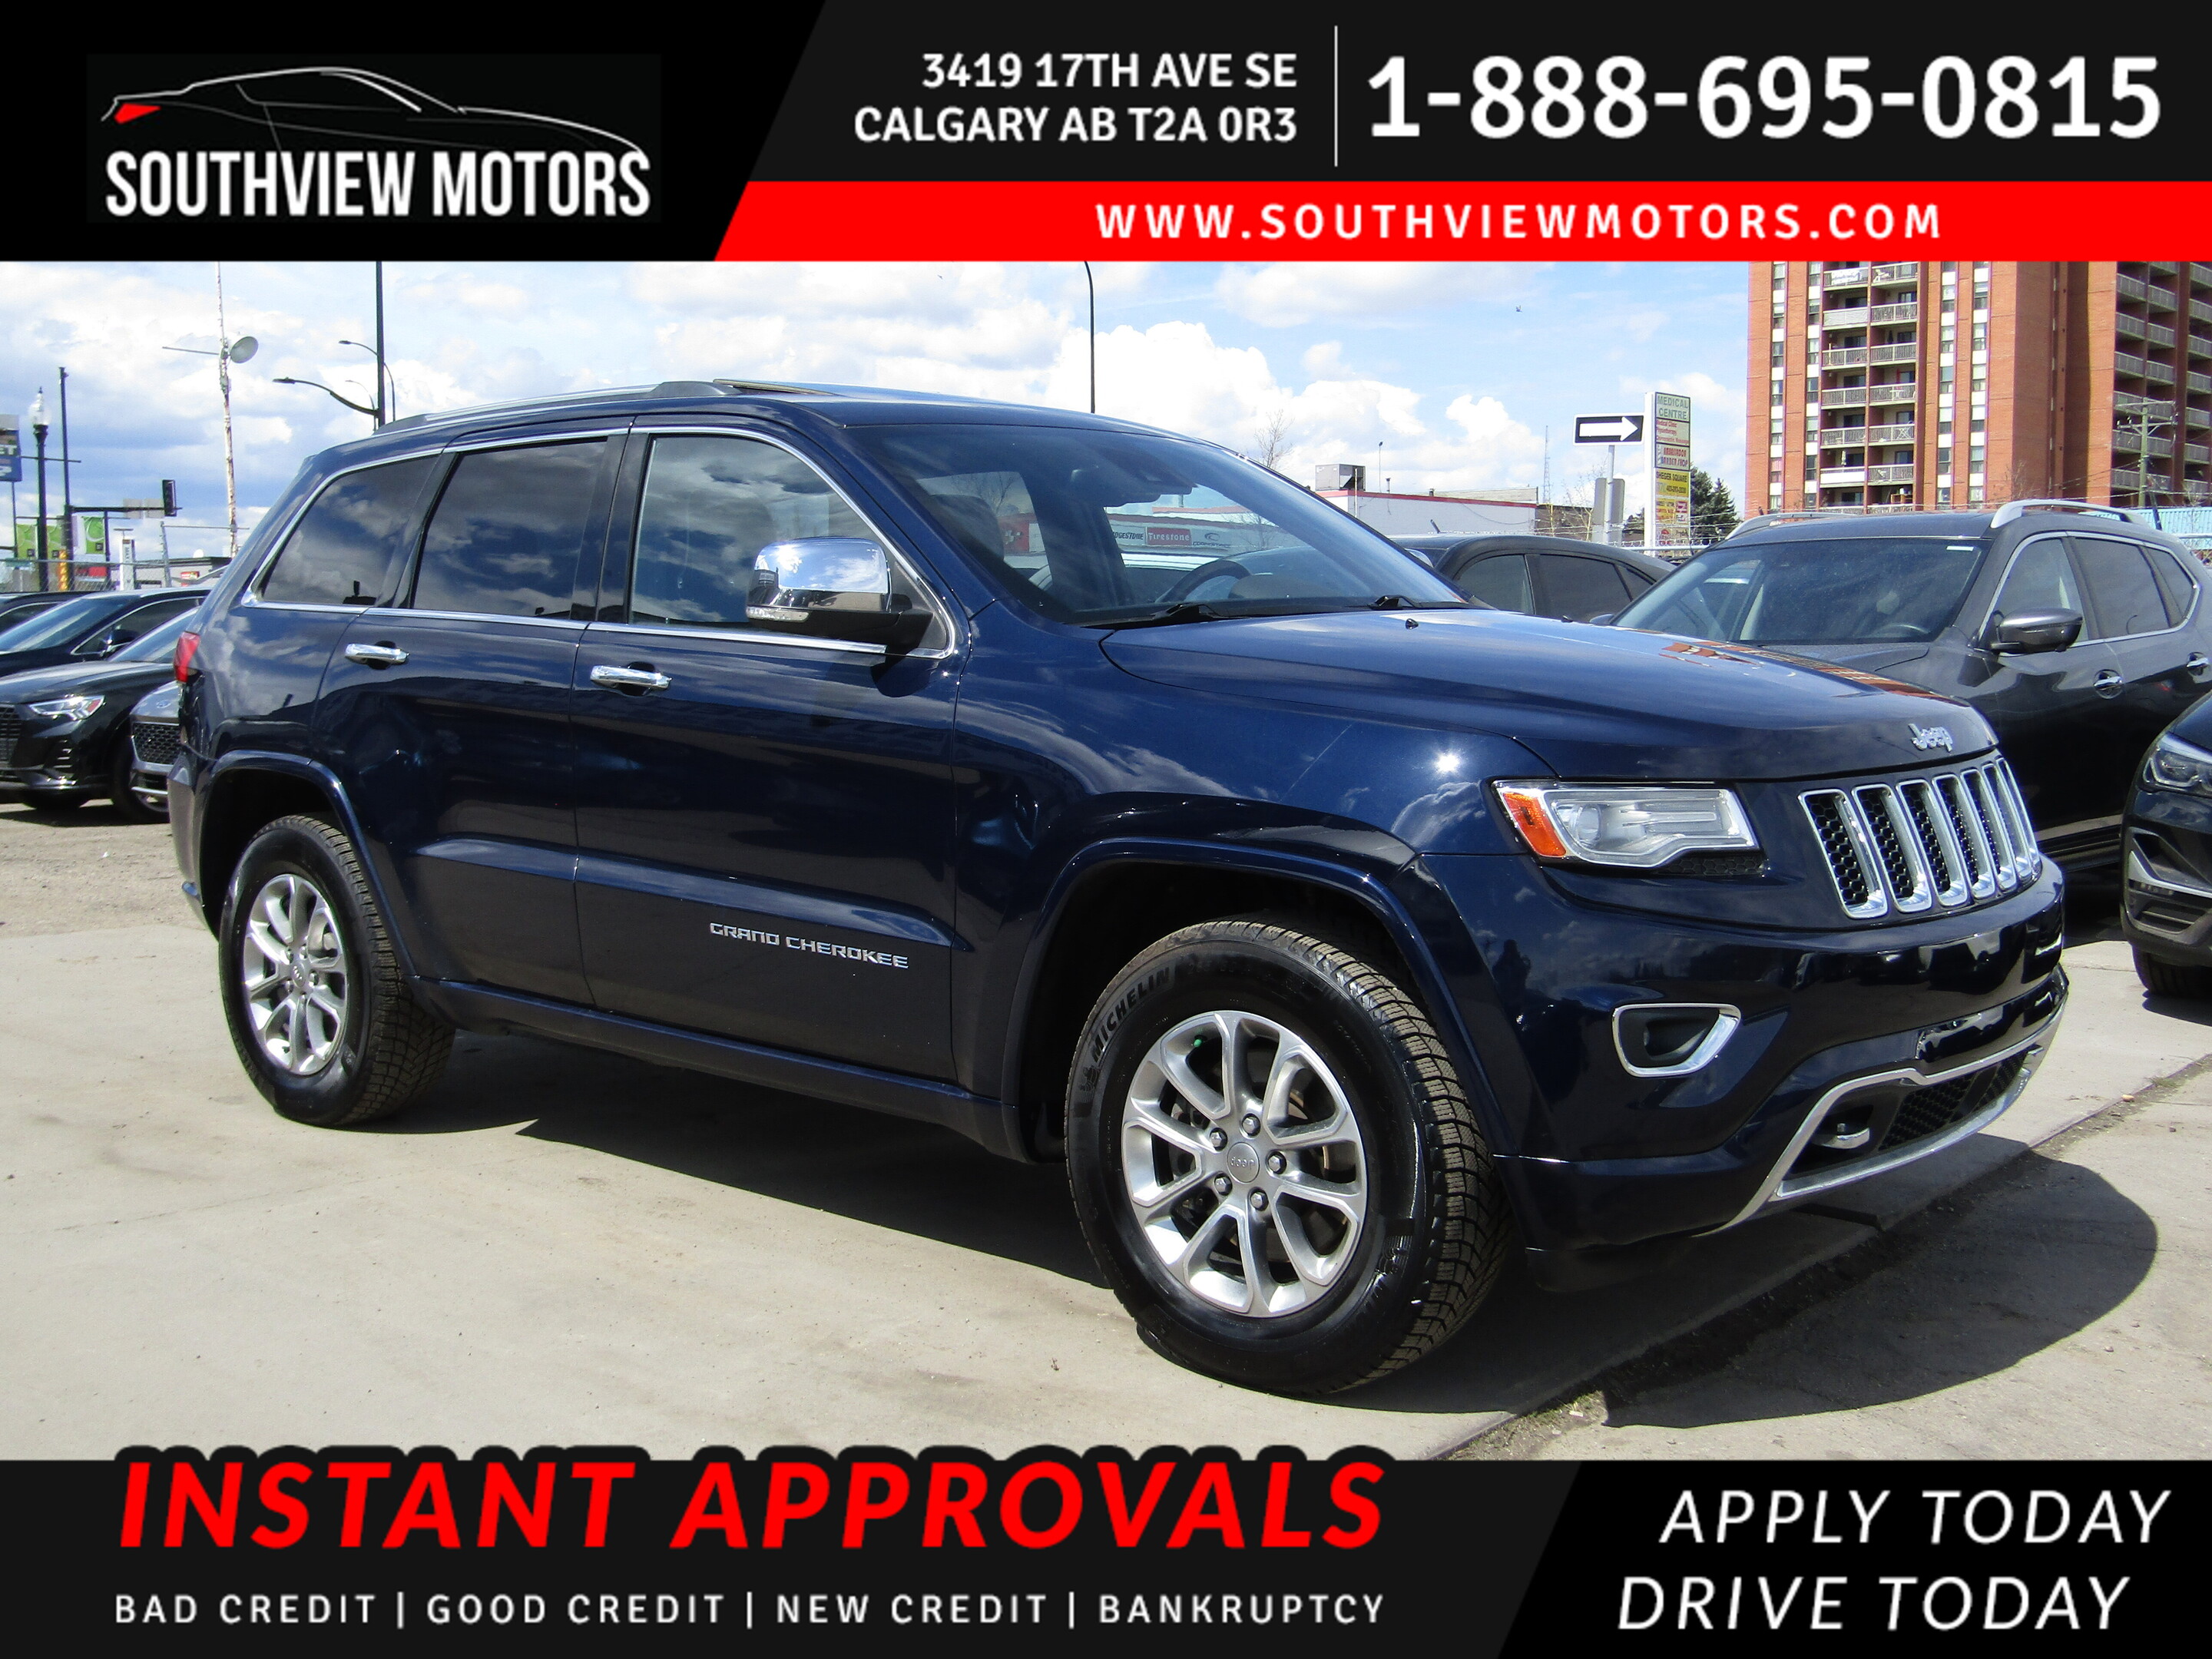 2014 Jeep Grand Cherokee OVERLAND 4WD 3.0L DIESEL B.S.A/NAV/CAM/PANOROOF